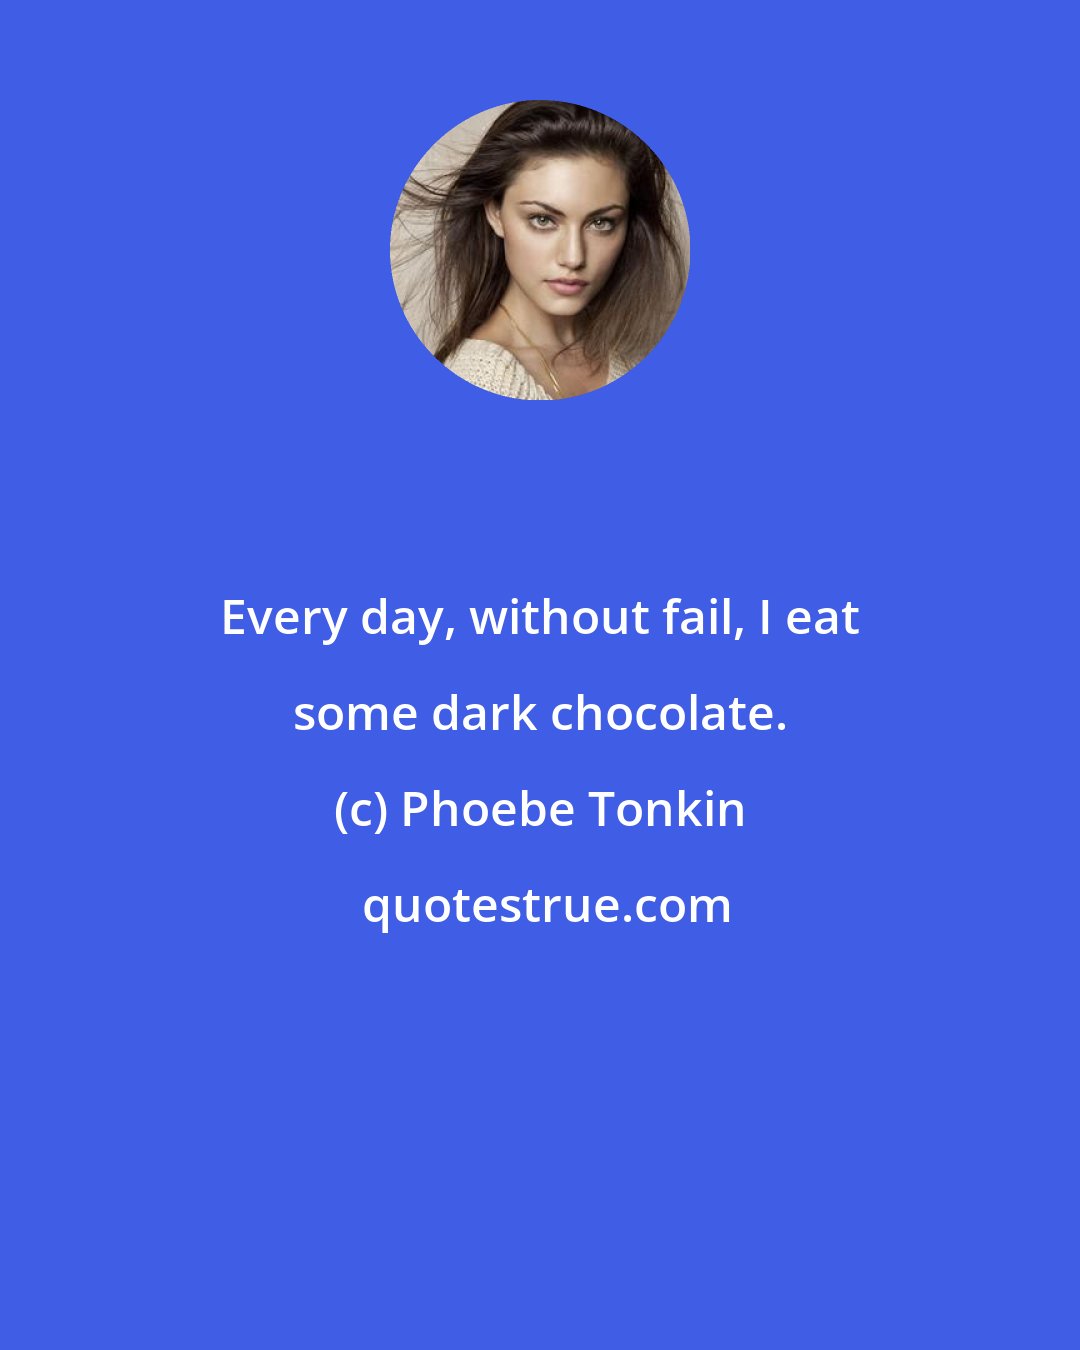 Phoebe Tonkin: Every day, without fail, I eat some dark chocolate.